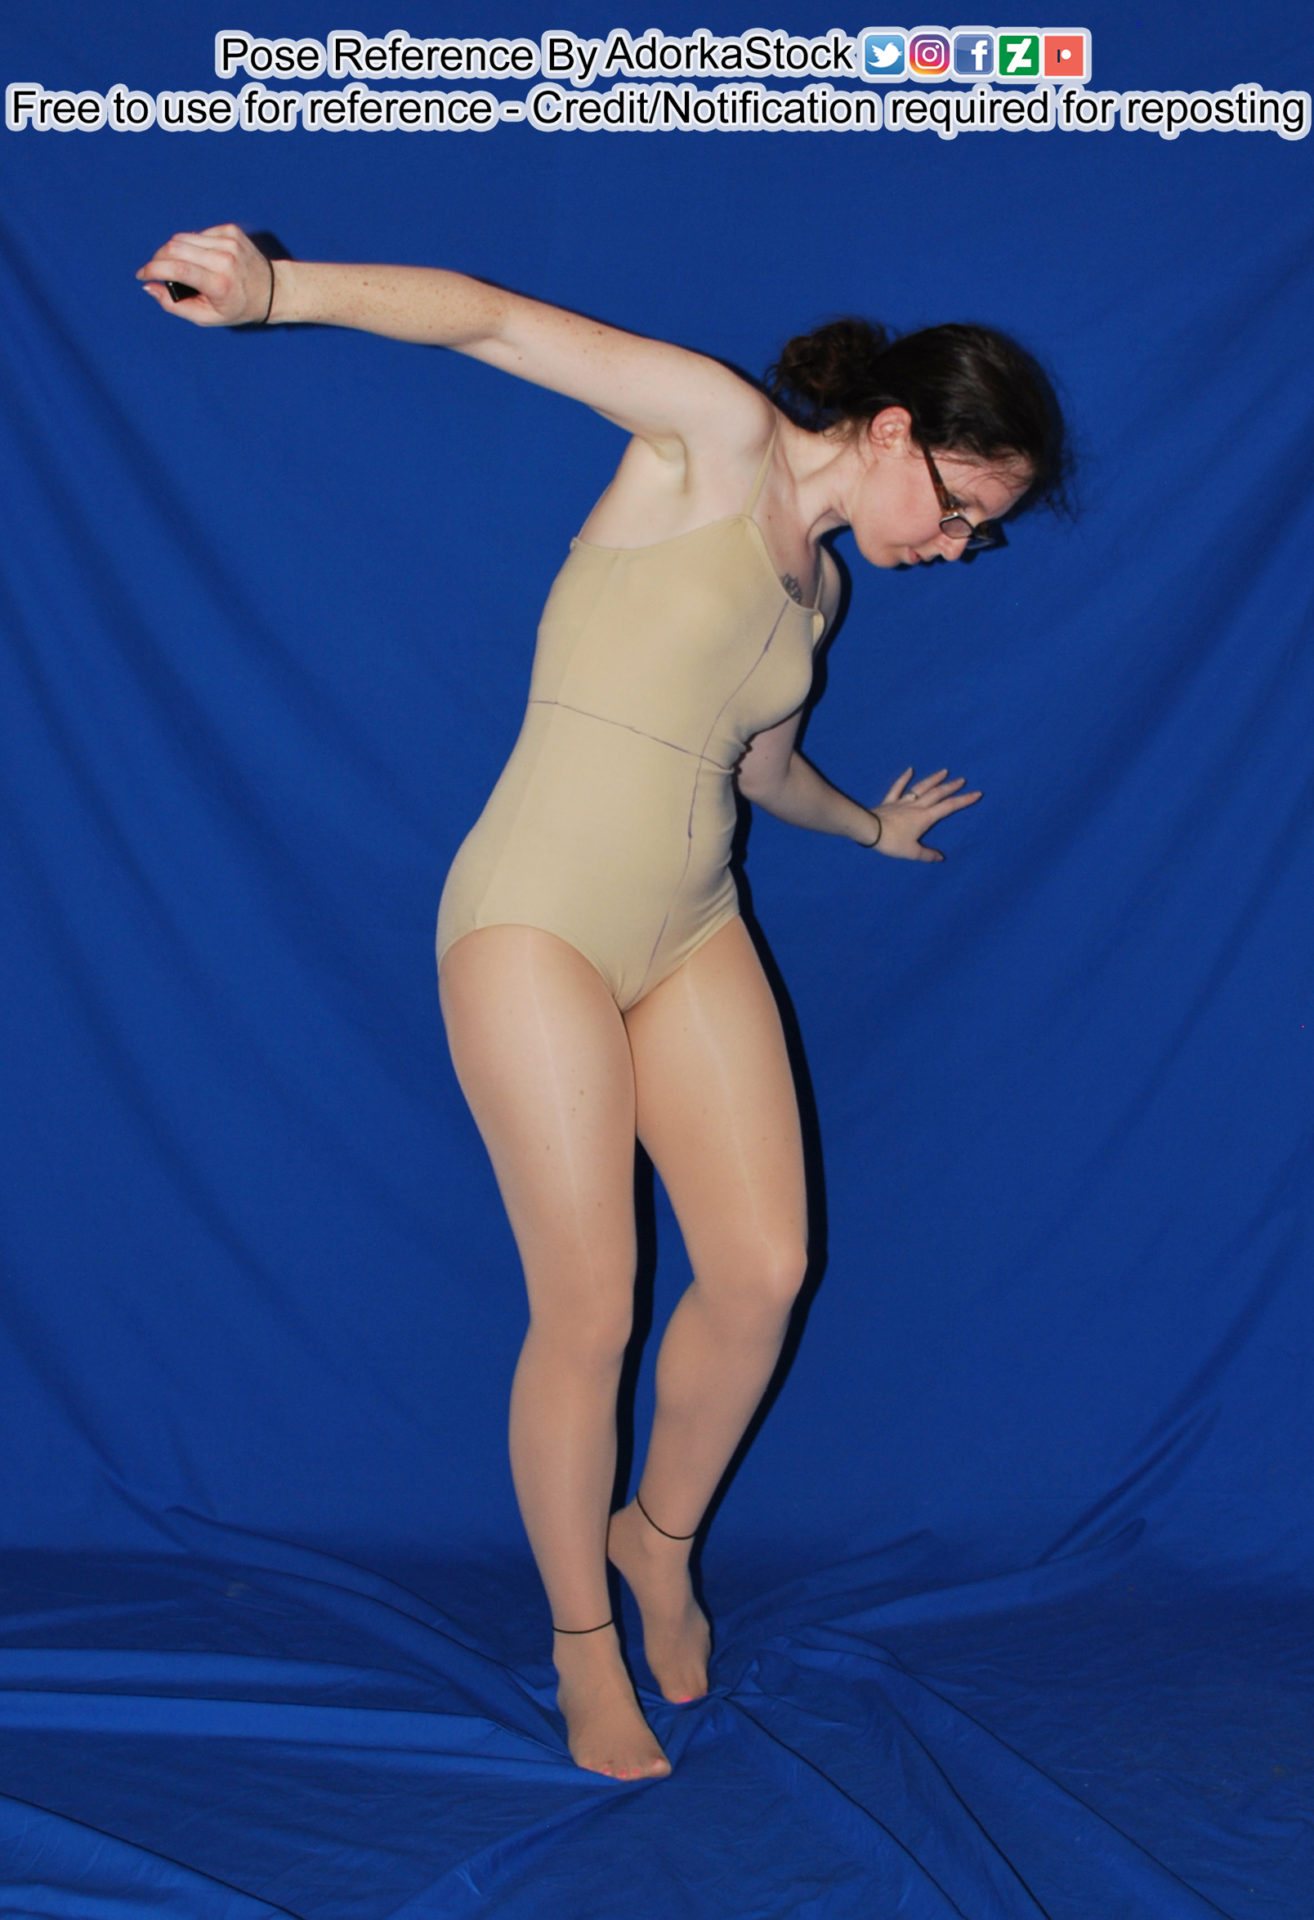 A woman in a tan bodysuit jumping into the air, looking down and appearing to float with her right arm raised behind her and the left stretched out to the side